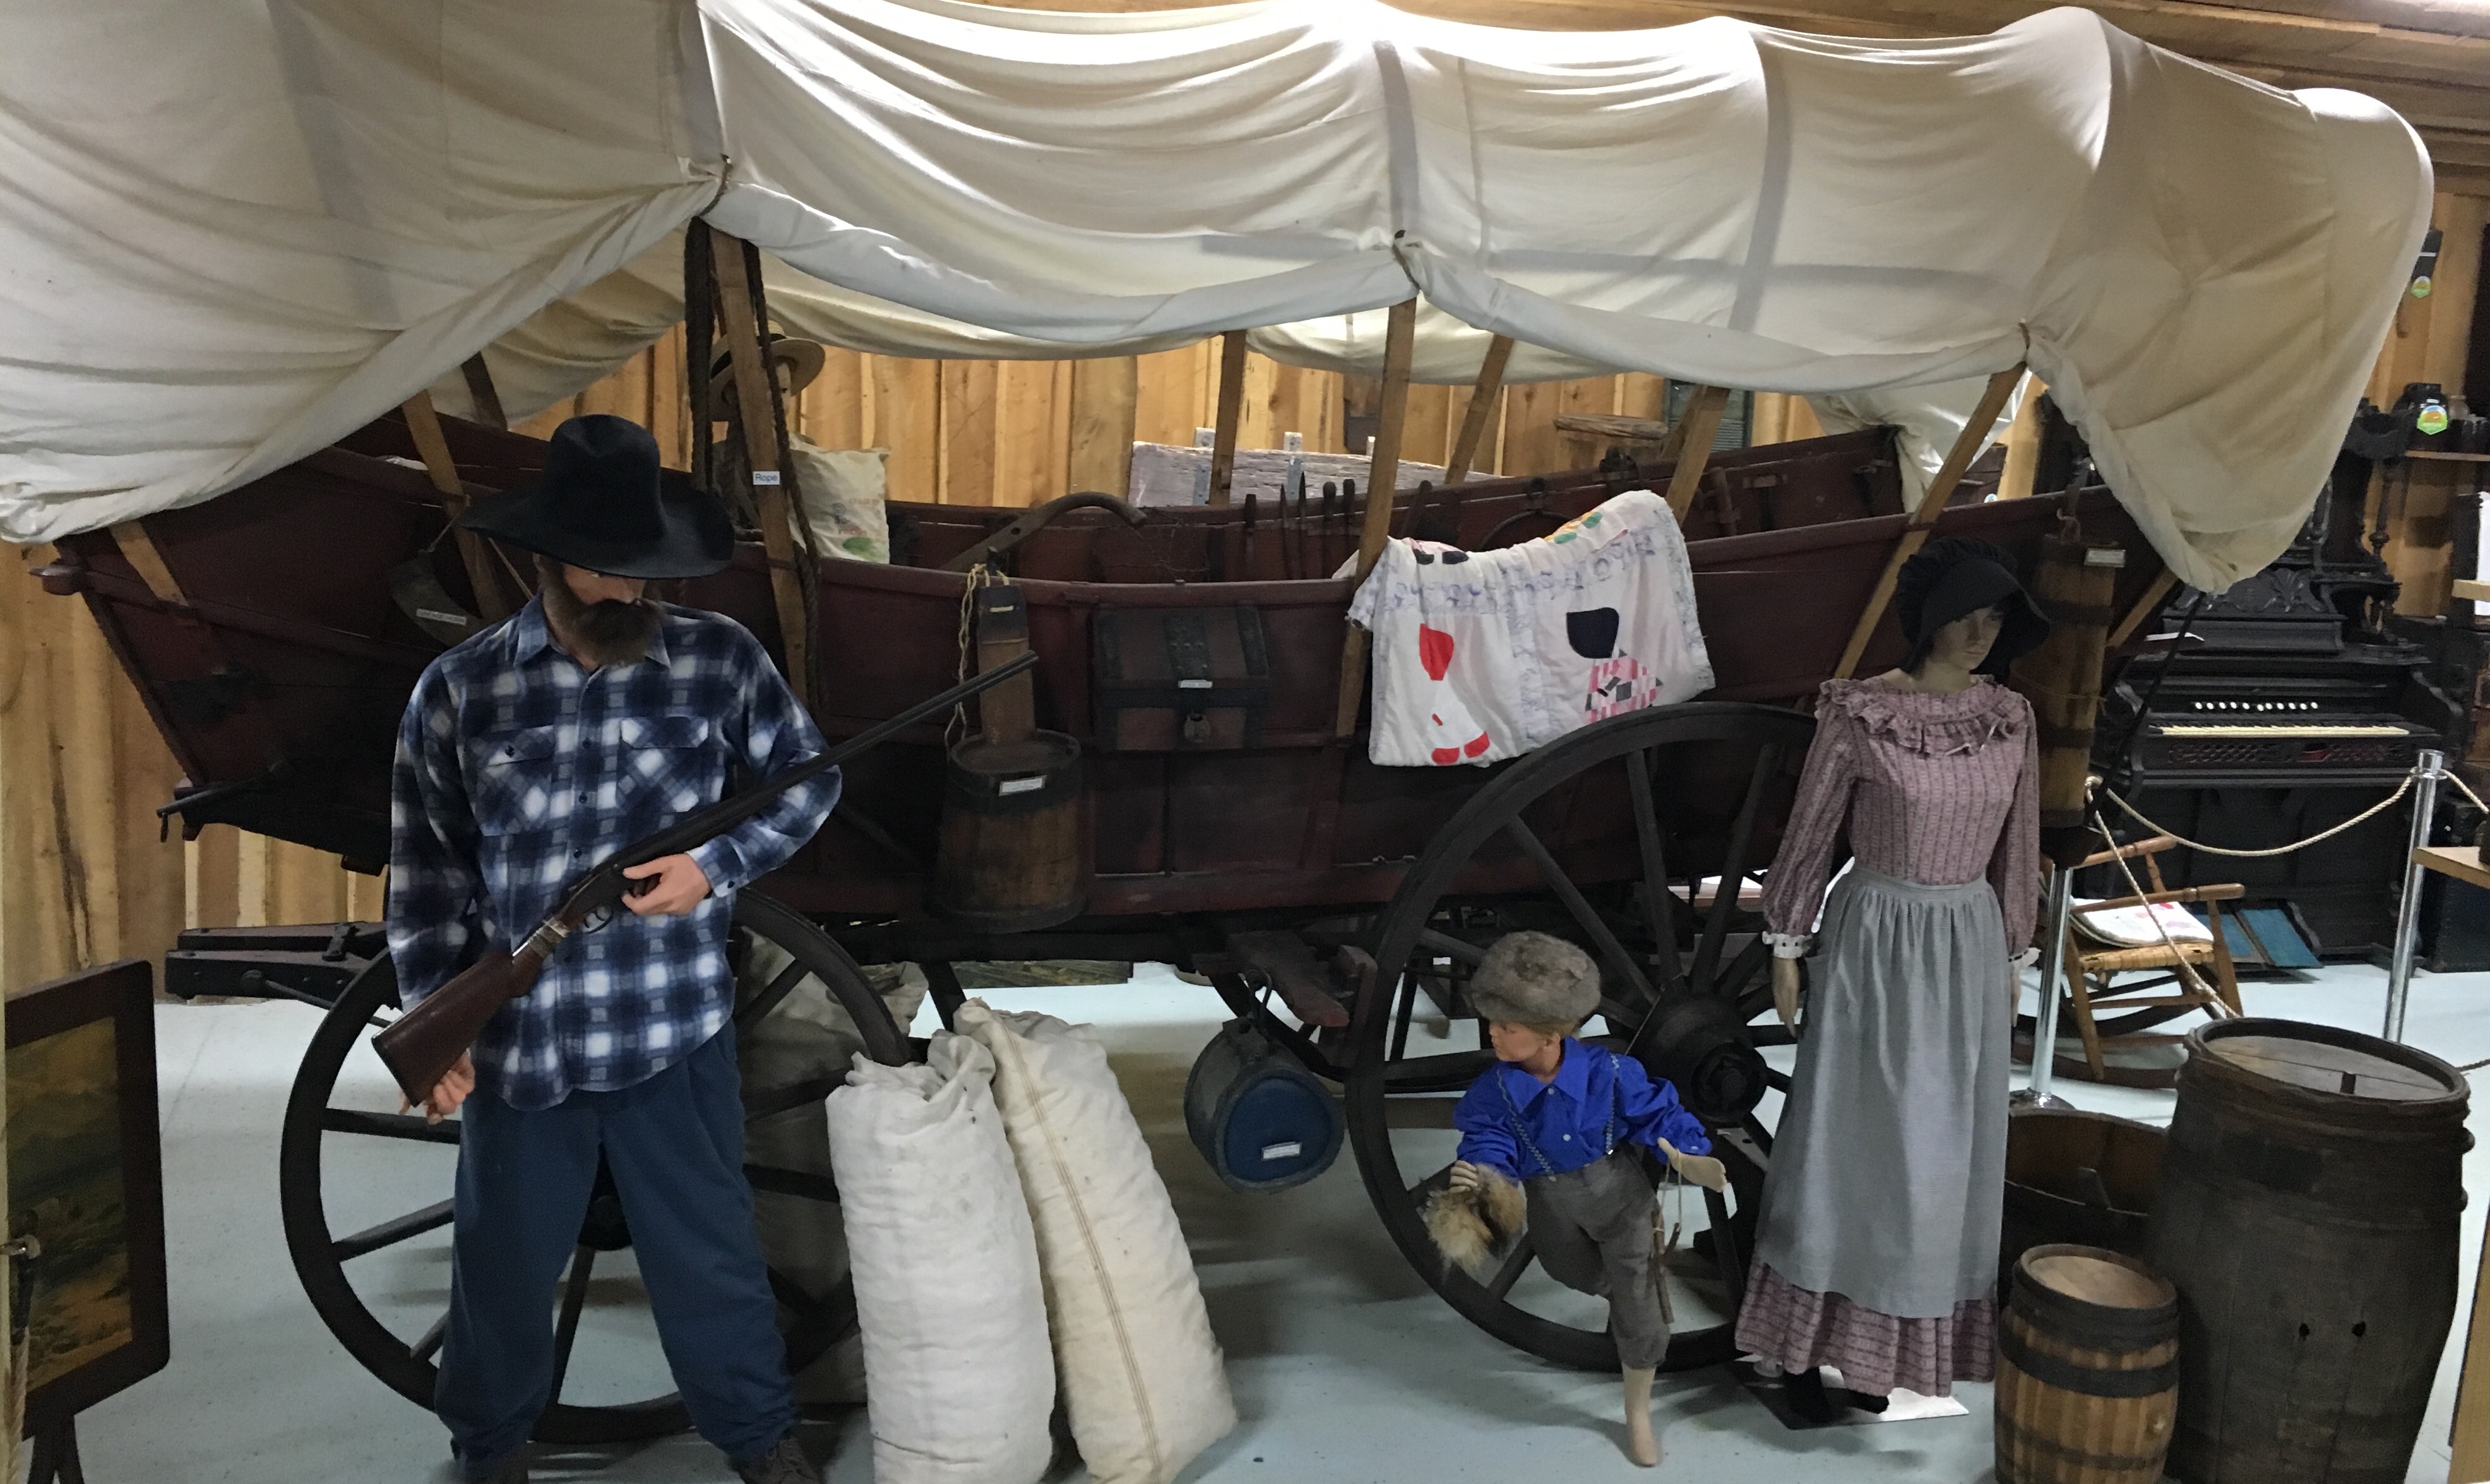 Conestoga wagons are recognizable by their distinct curved shape. They were primarily used in the 1700s and early 1800s for transporting cargo.